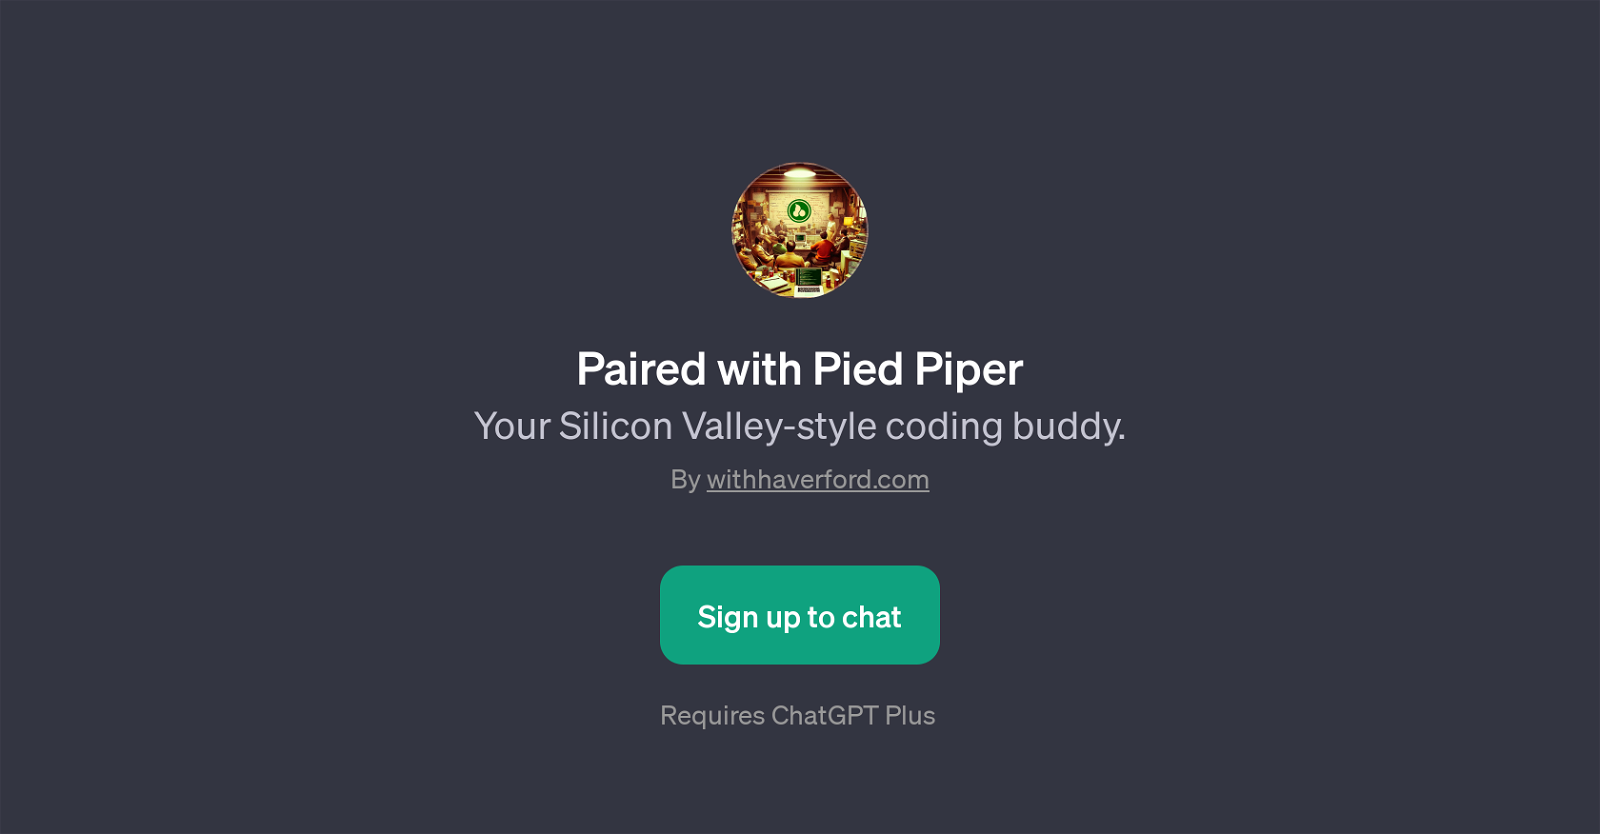 Paired with Pied Piper website